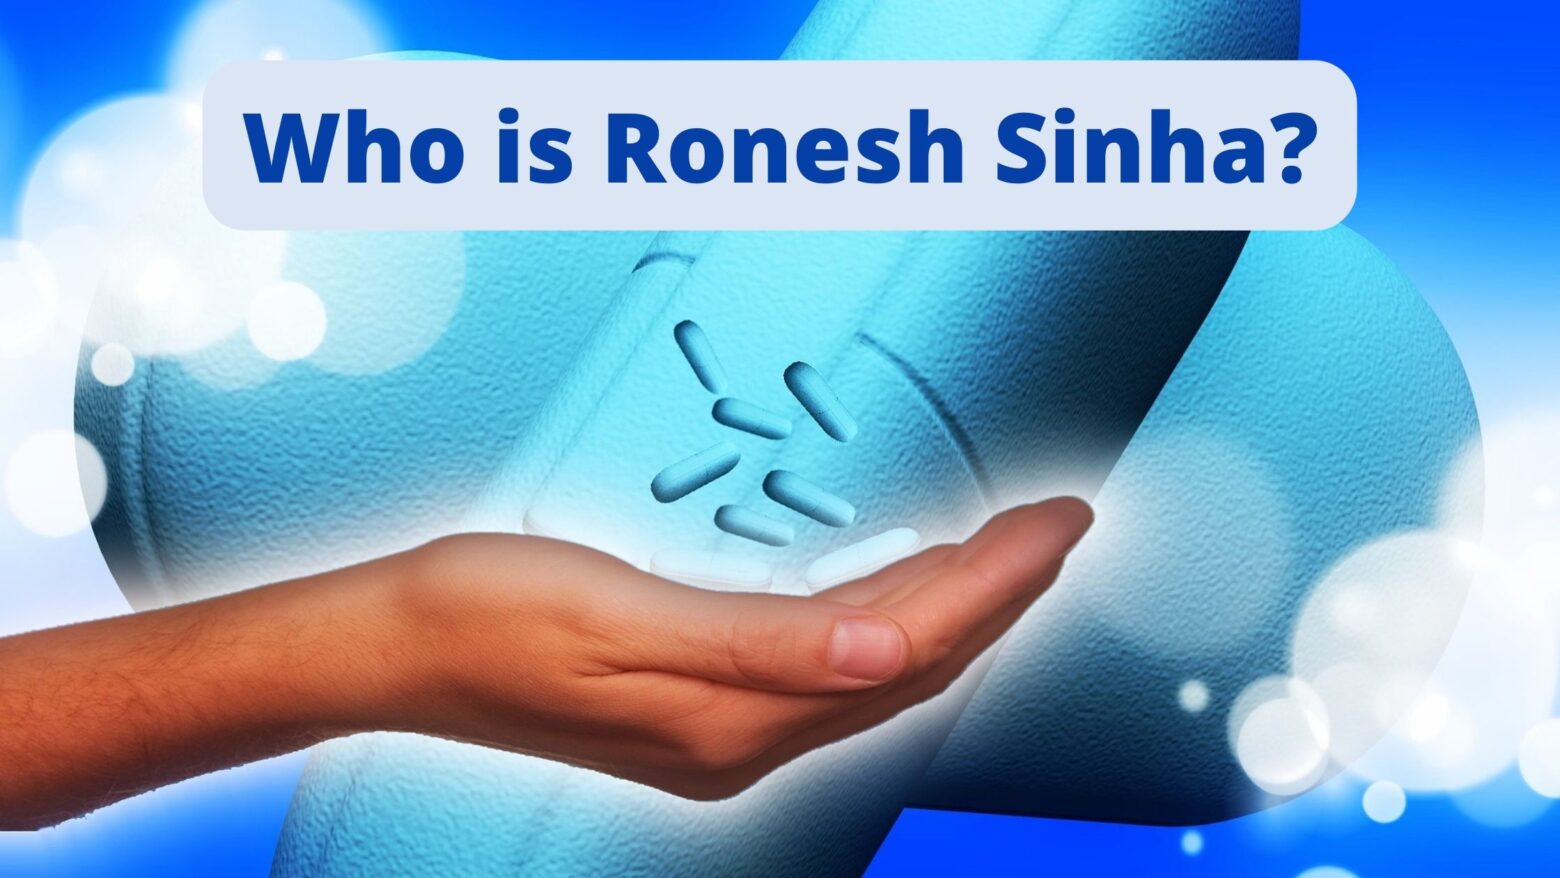 Who is Ronesh Sinha?